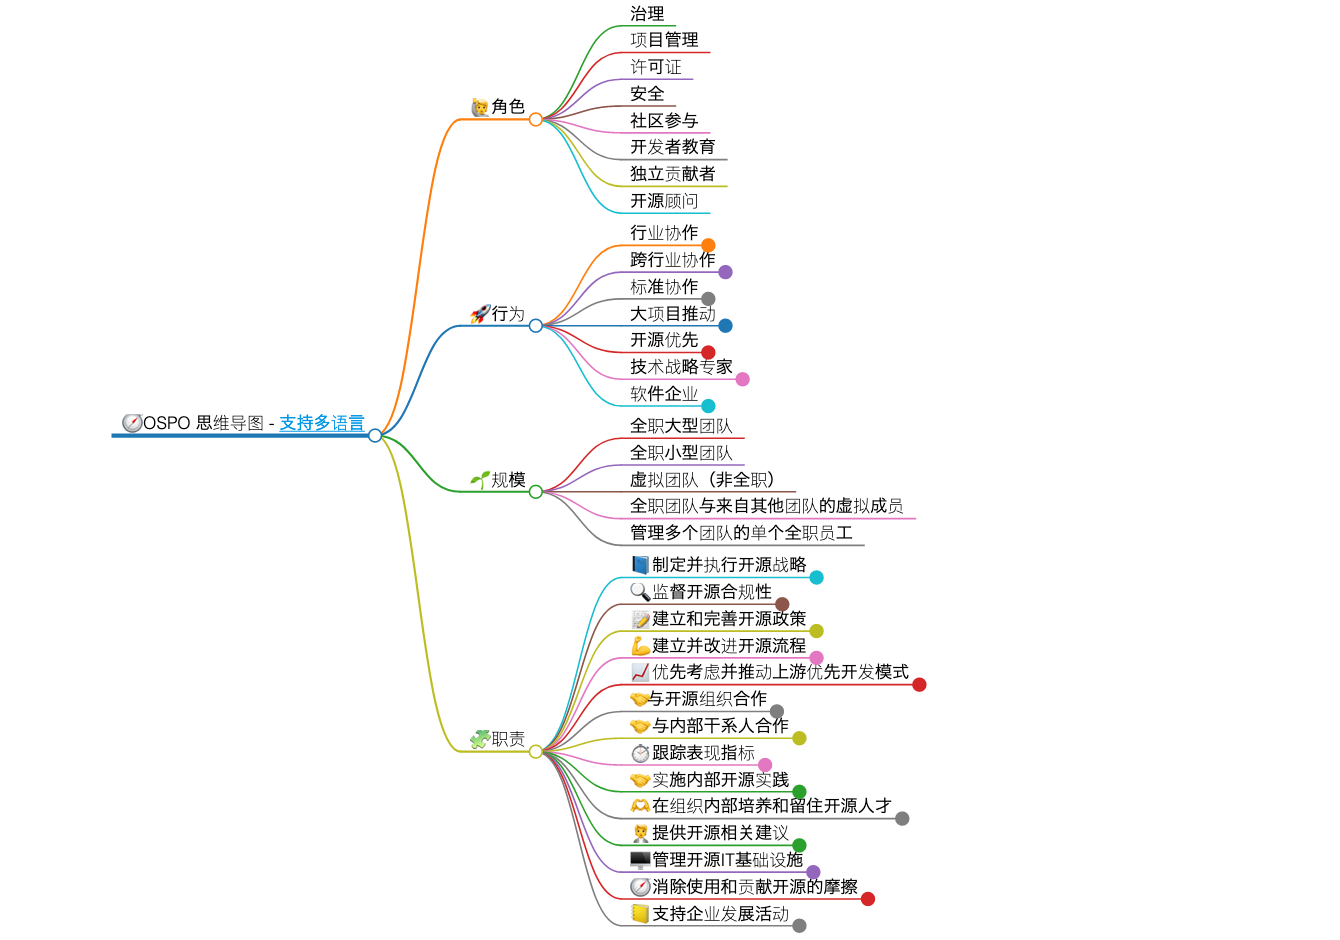 Screenshot of the Chinese Mind map